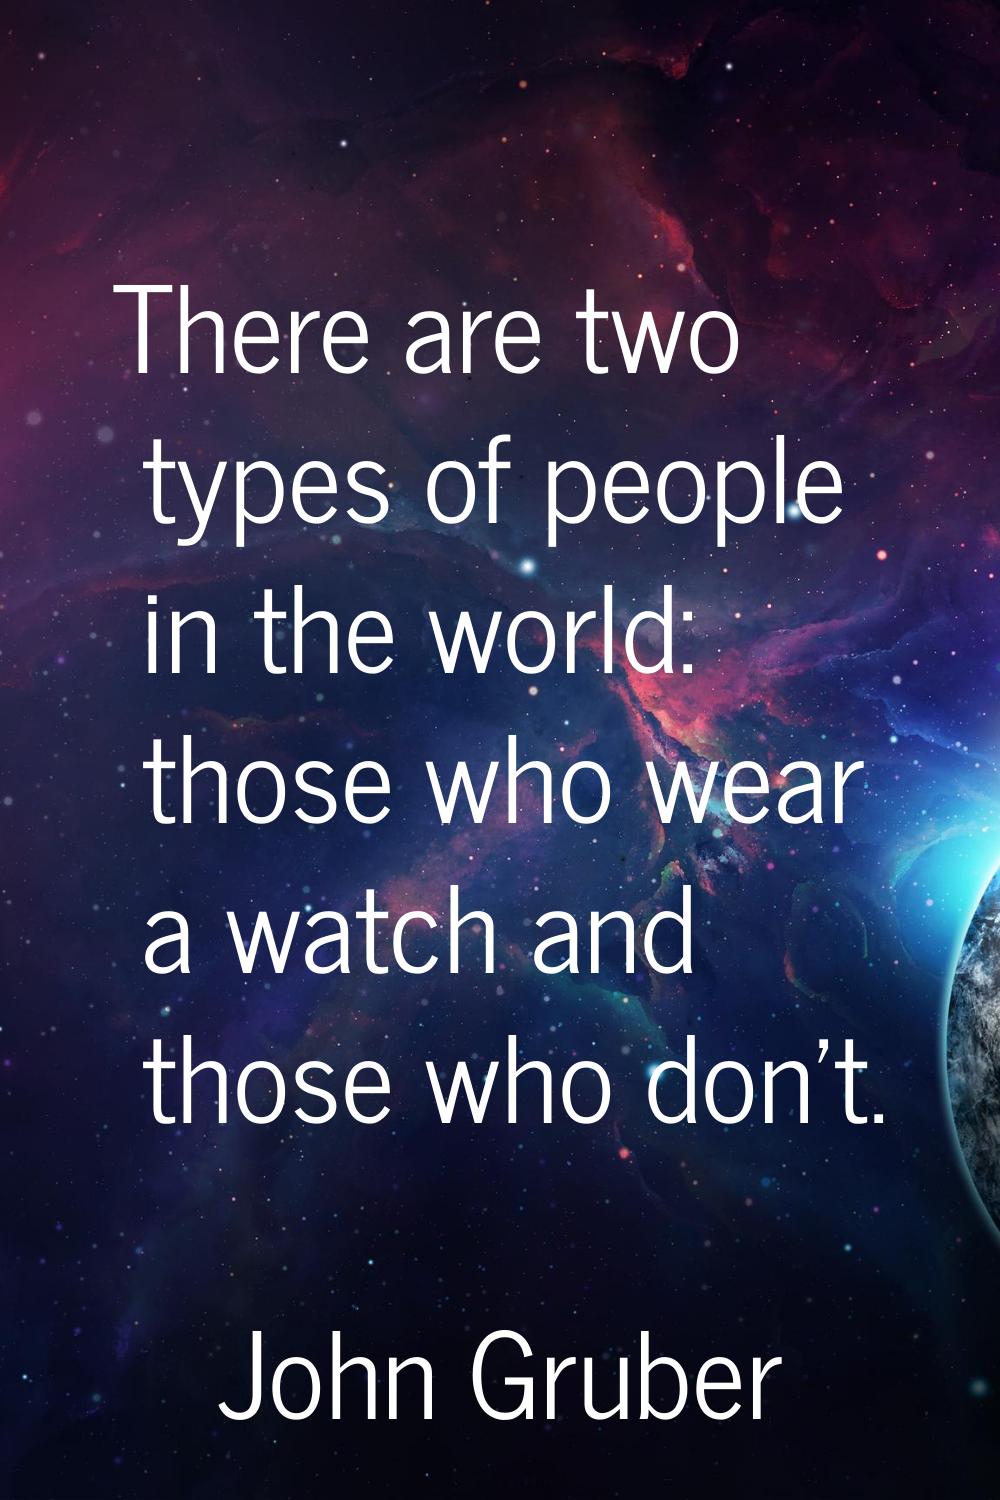 There are two types of people in the world: those who wear a watch and those who don't.